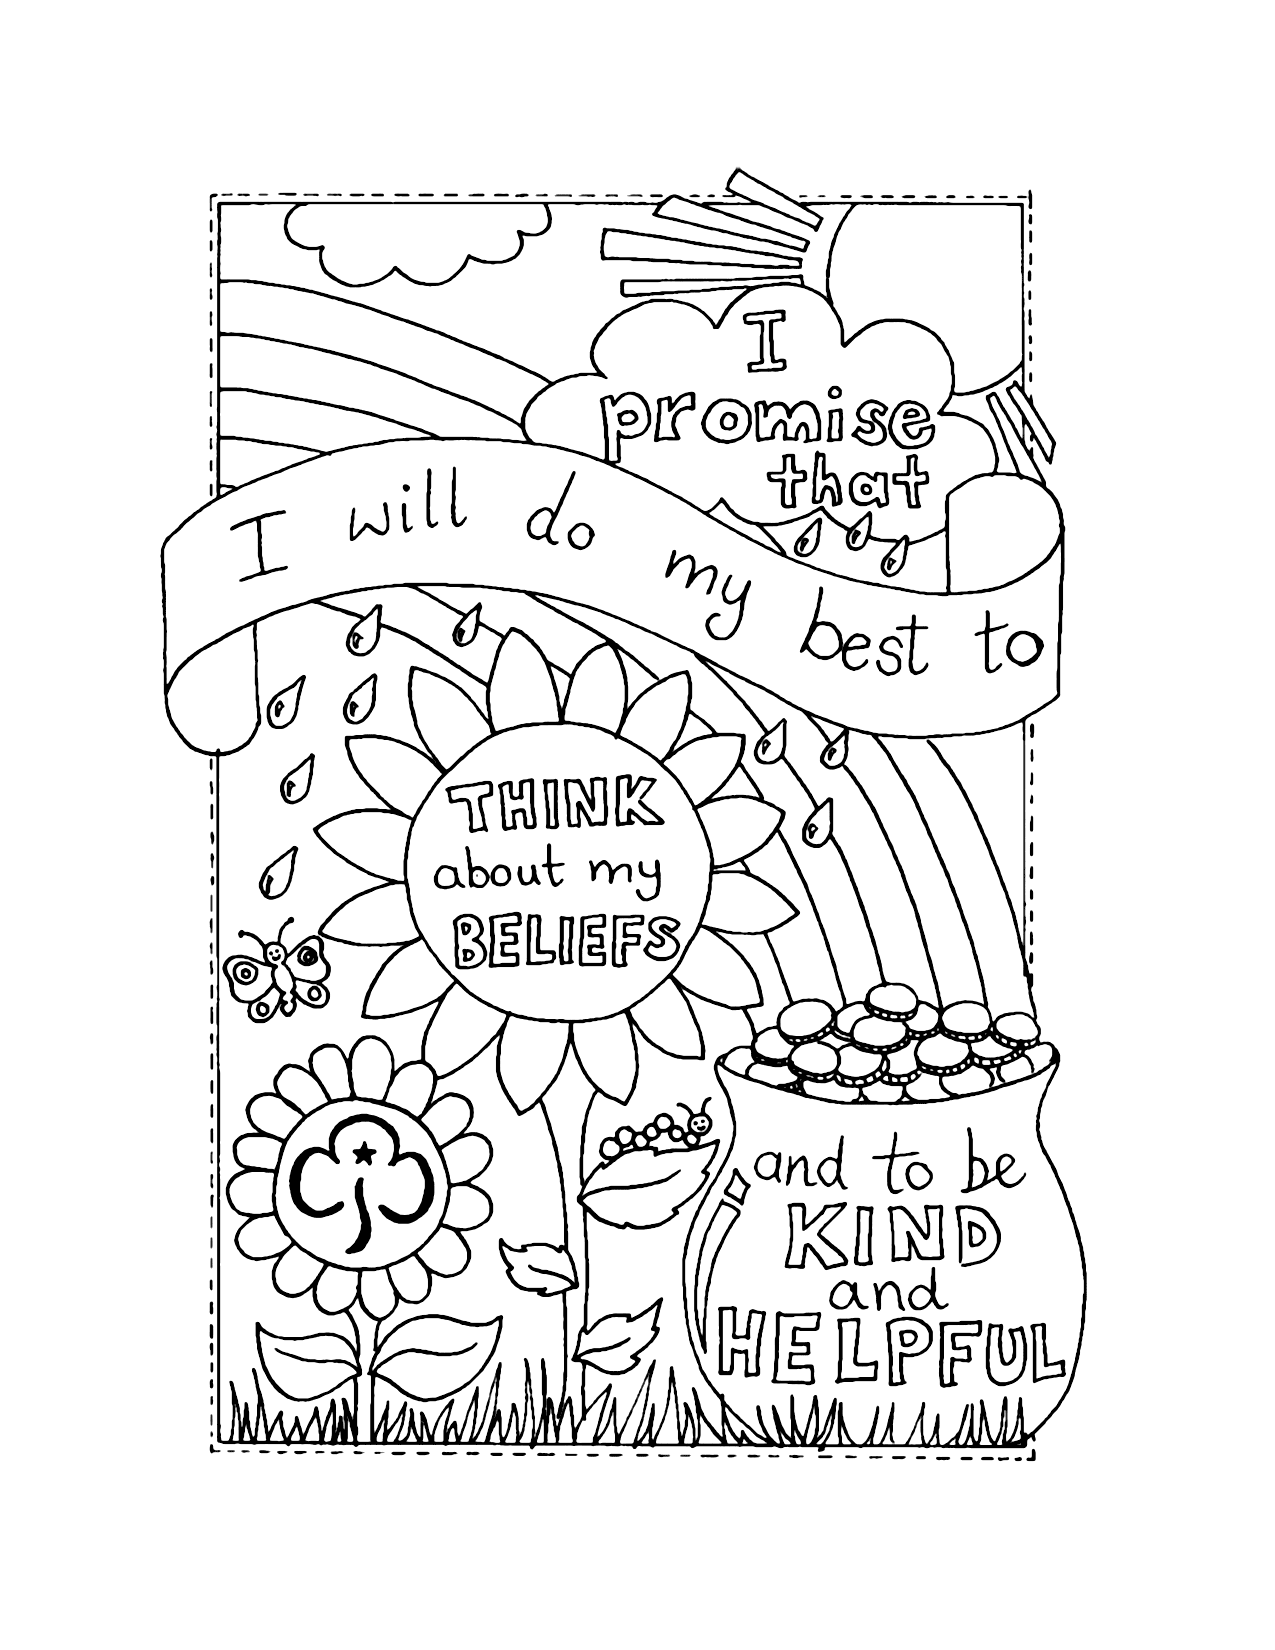 Girl Scout Promise Coloring Page